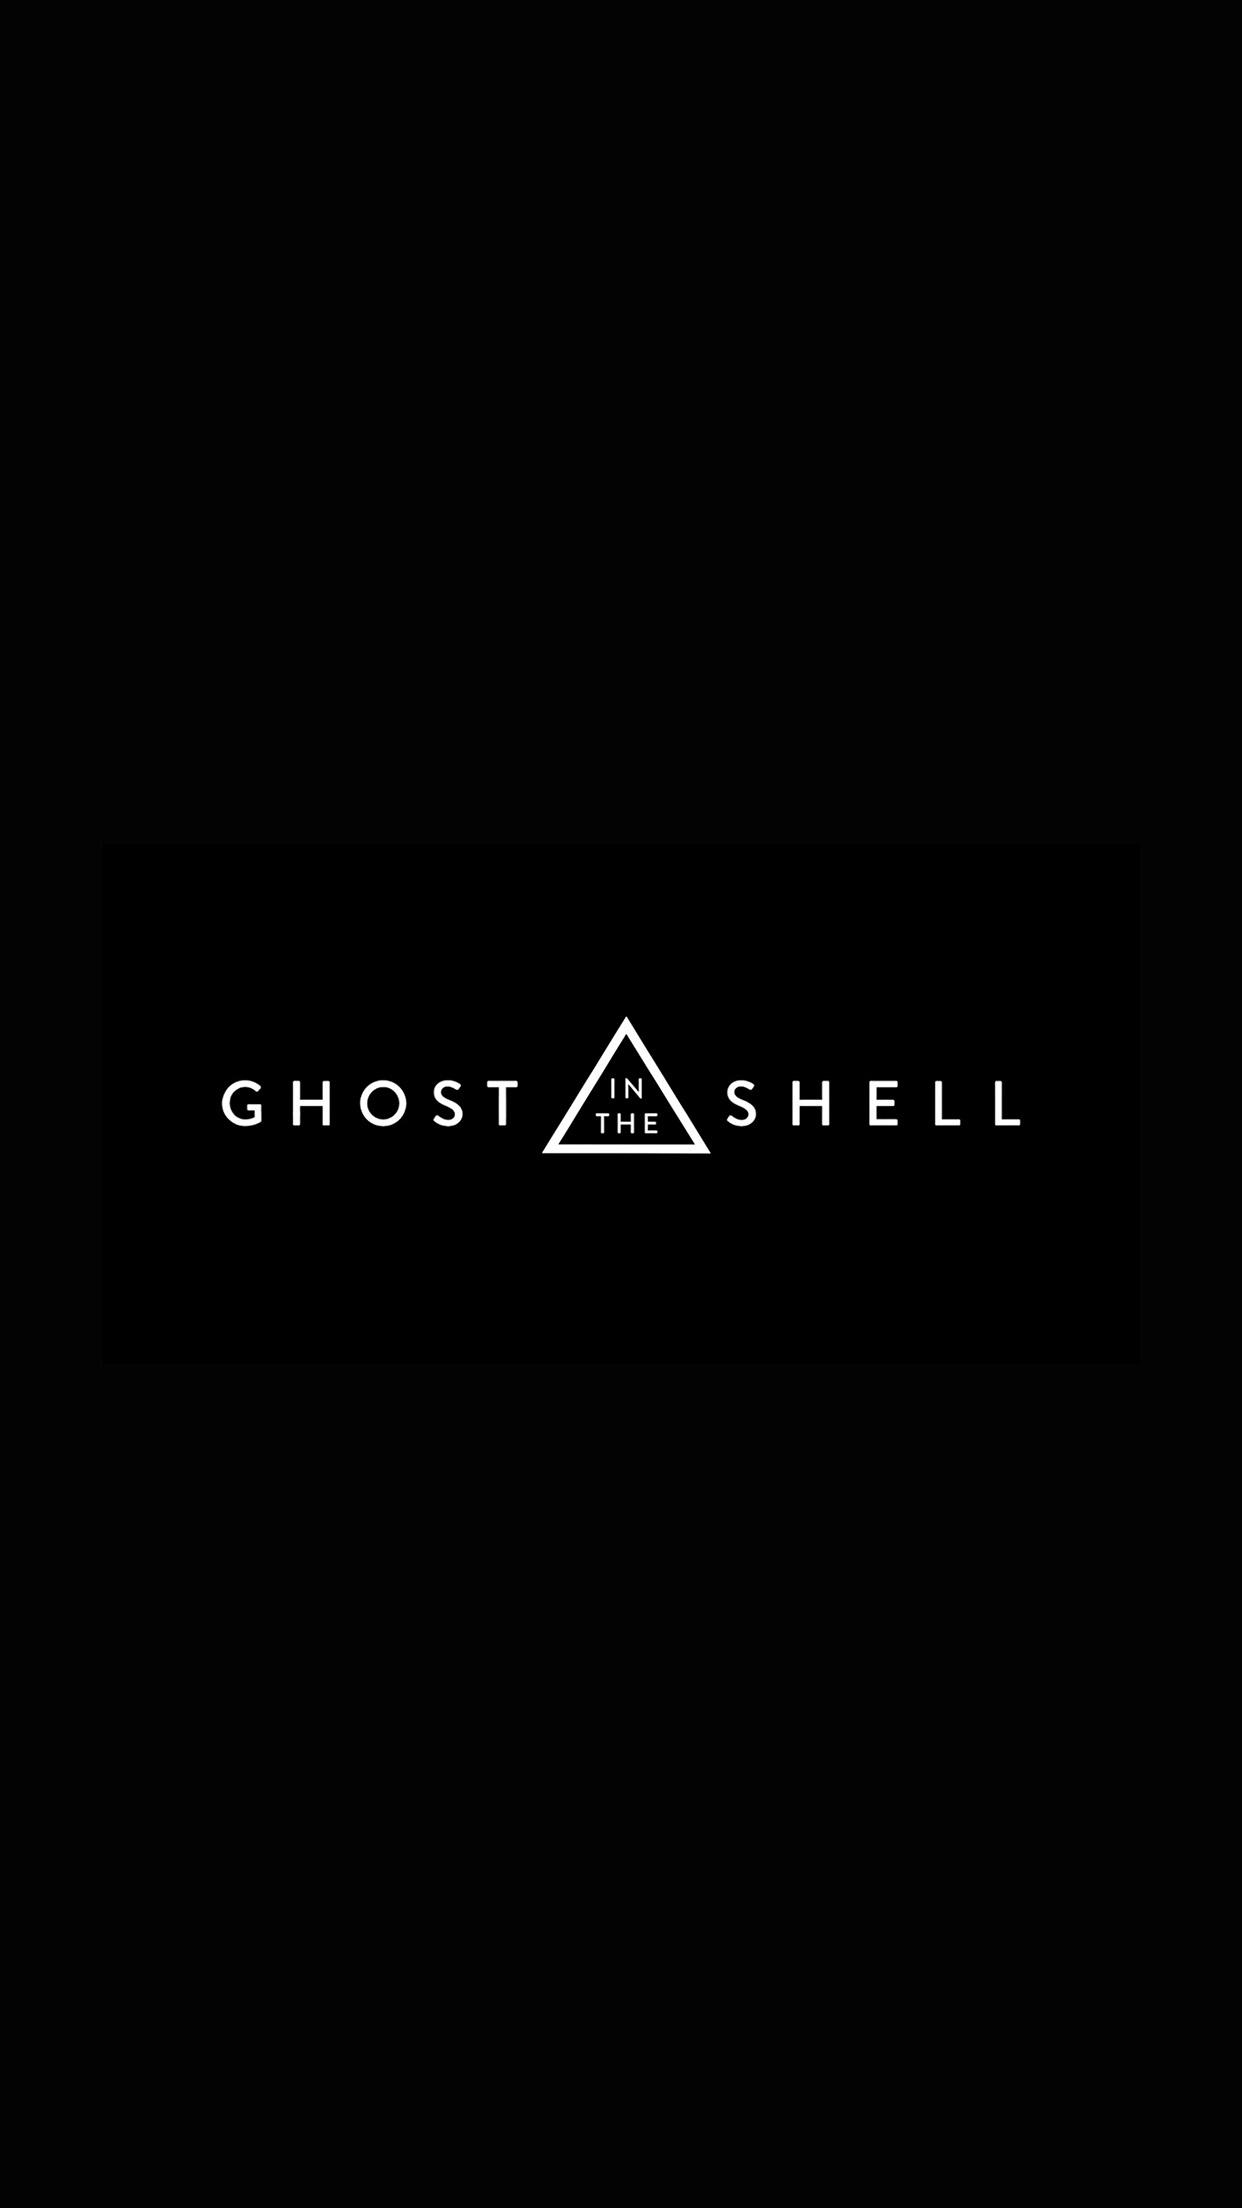 Ghost In The Shell Dark Logo Film .androidhdwallpaper.com